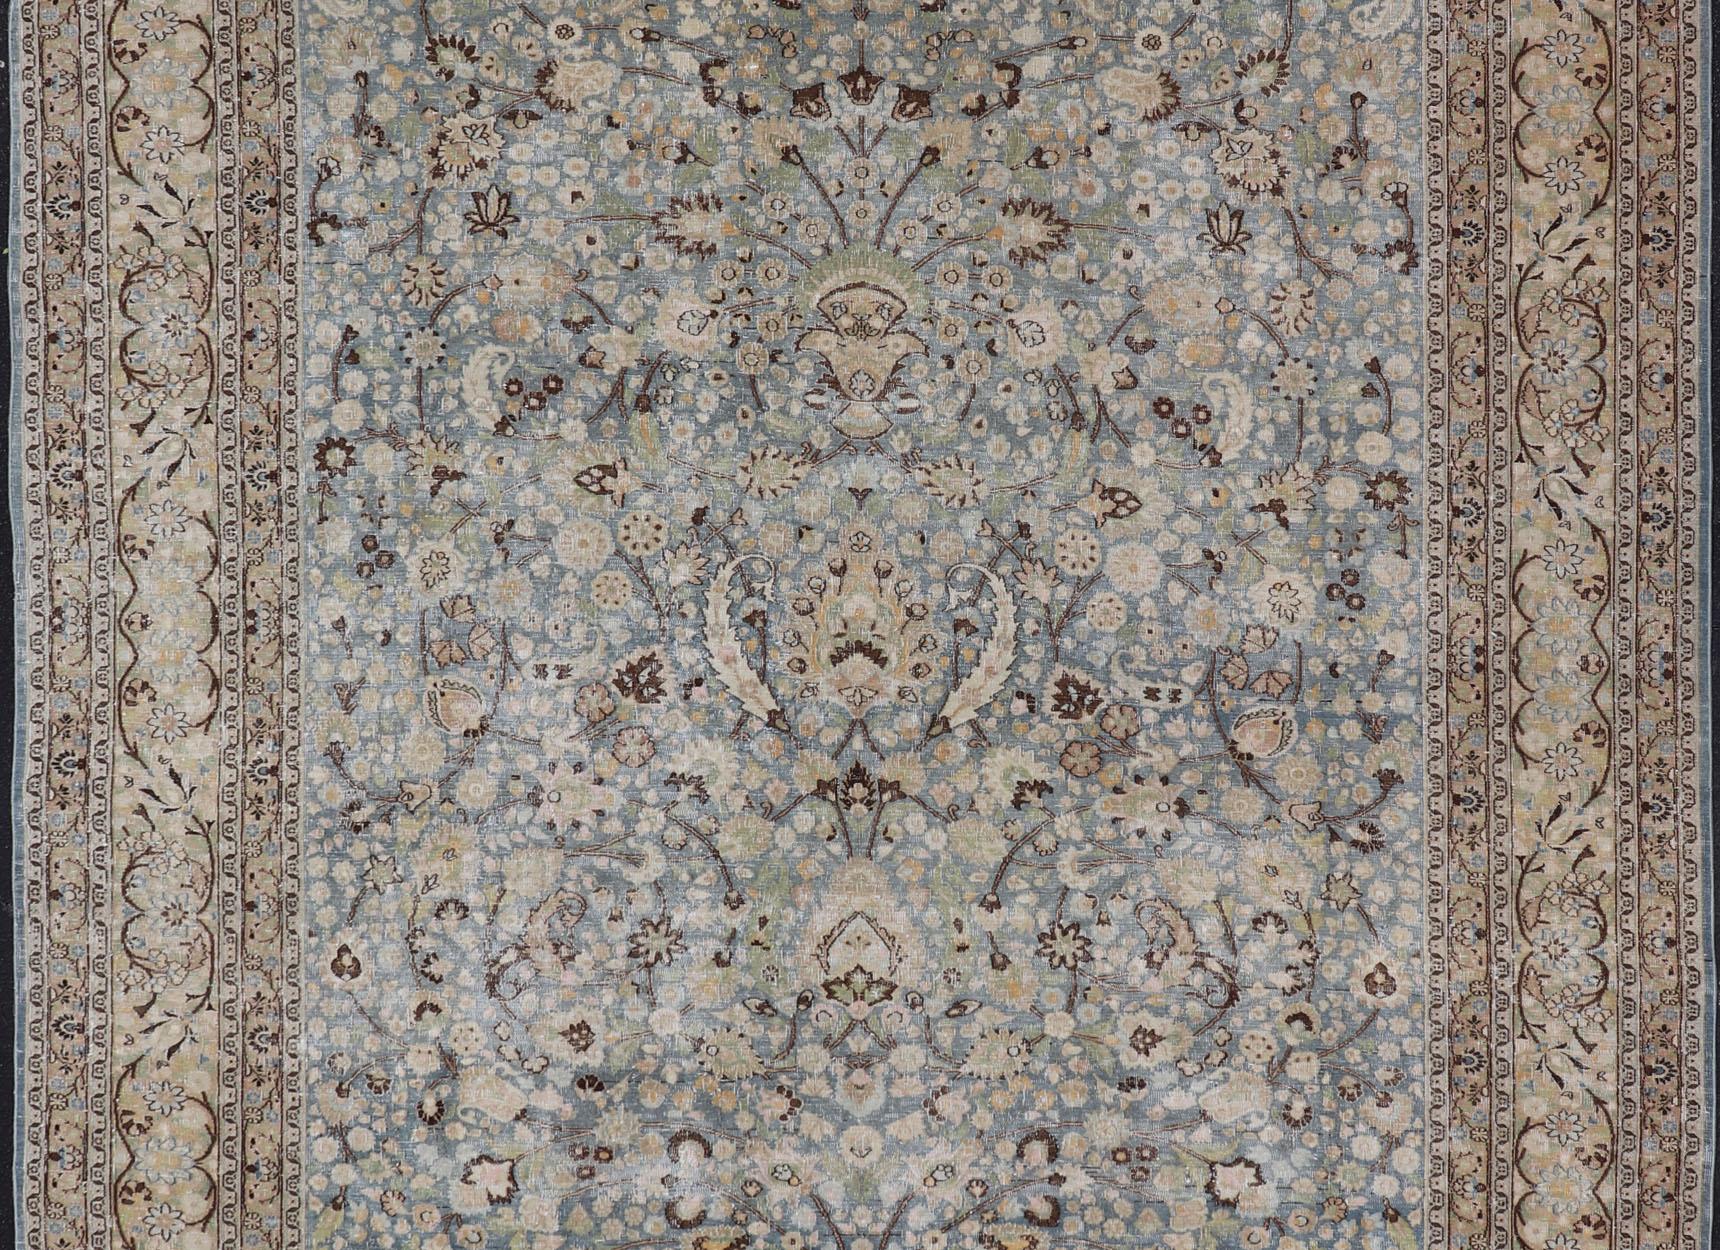 Antique Persian Khorassan Rug with All-Over Floral Design in Soft Blue Tones For Sale 2